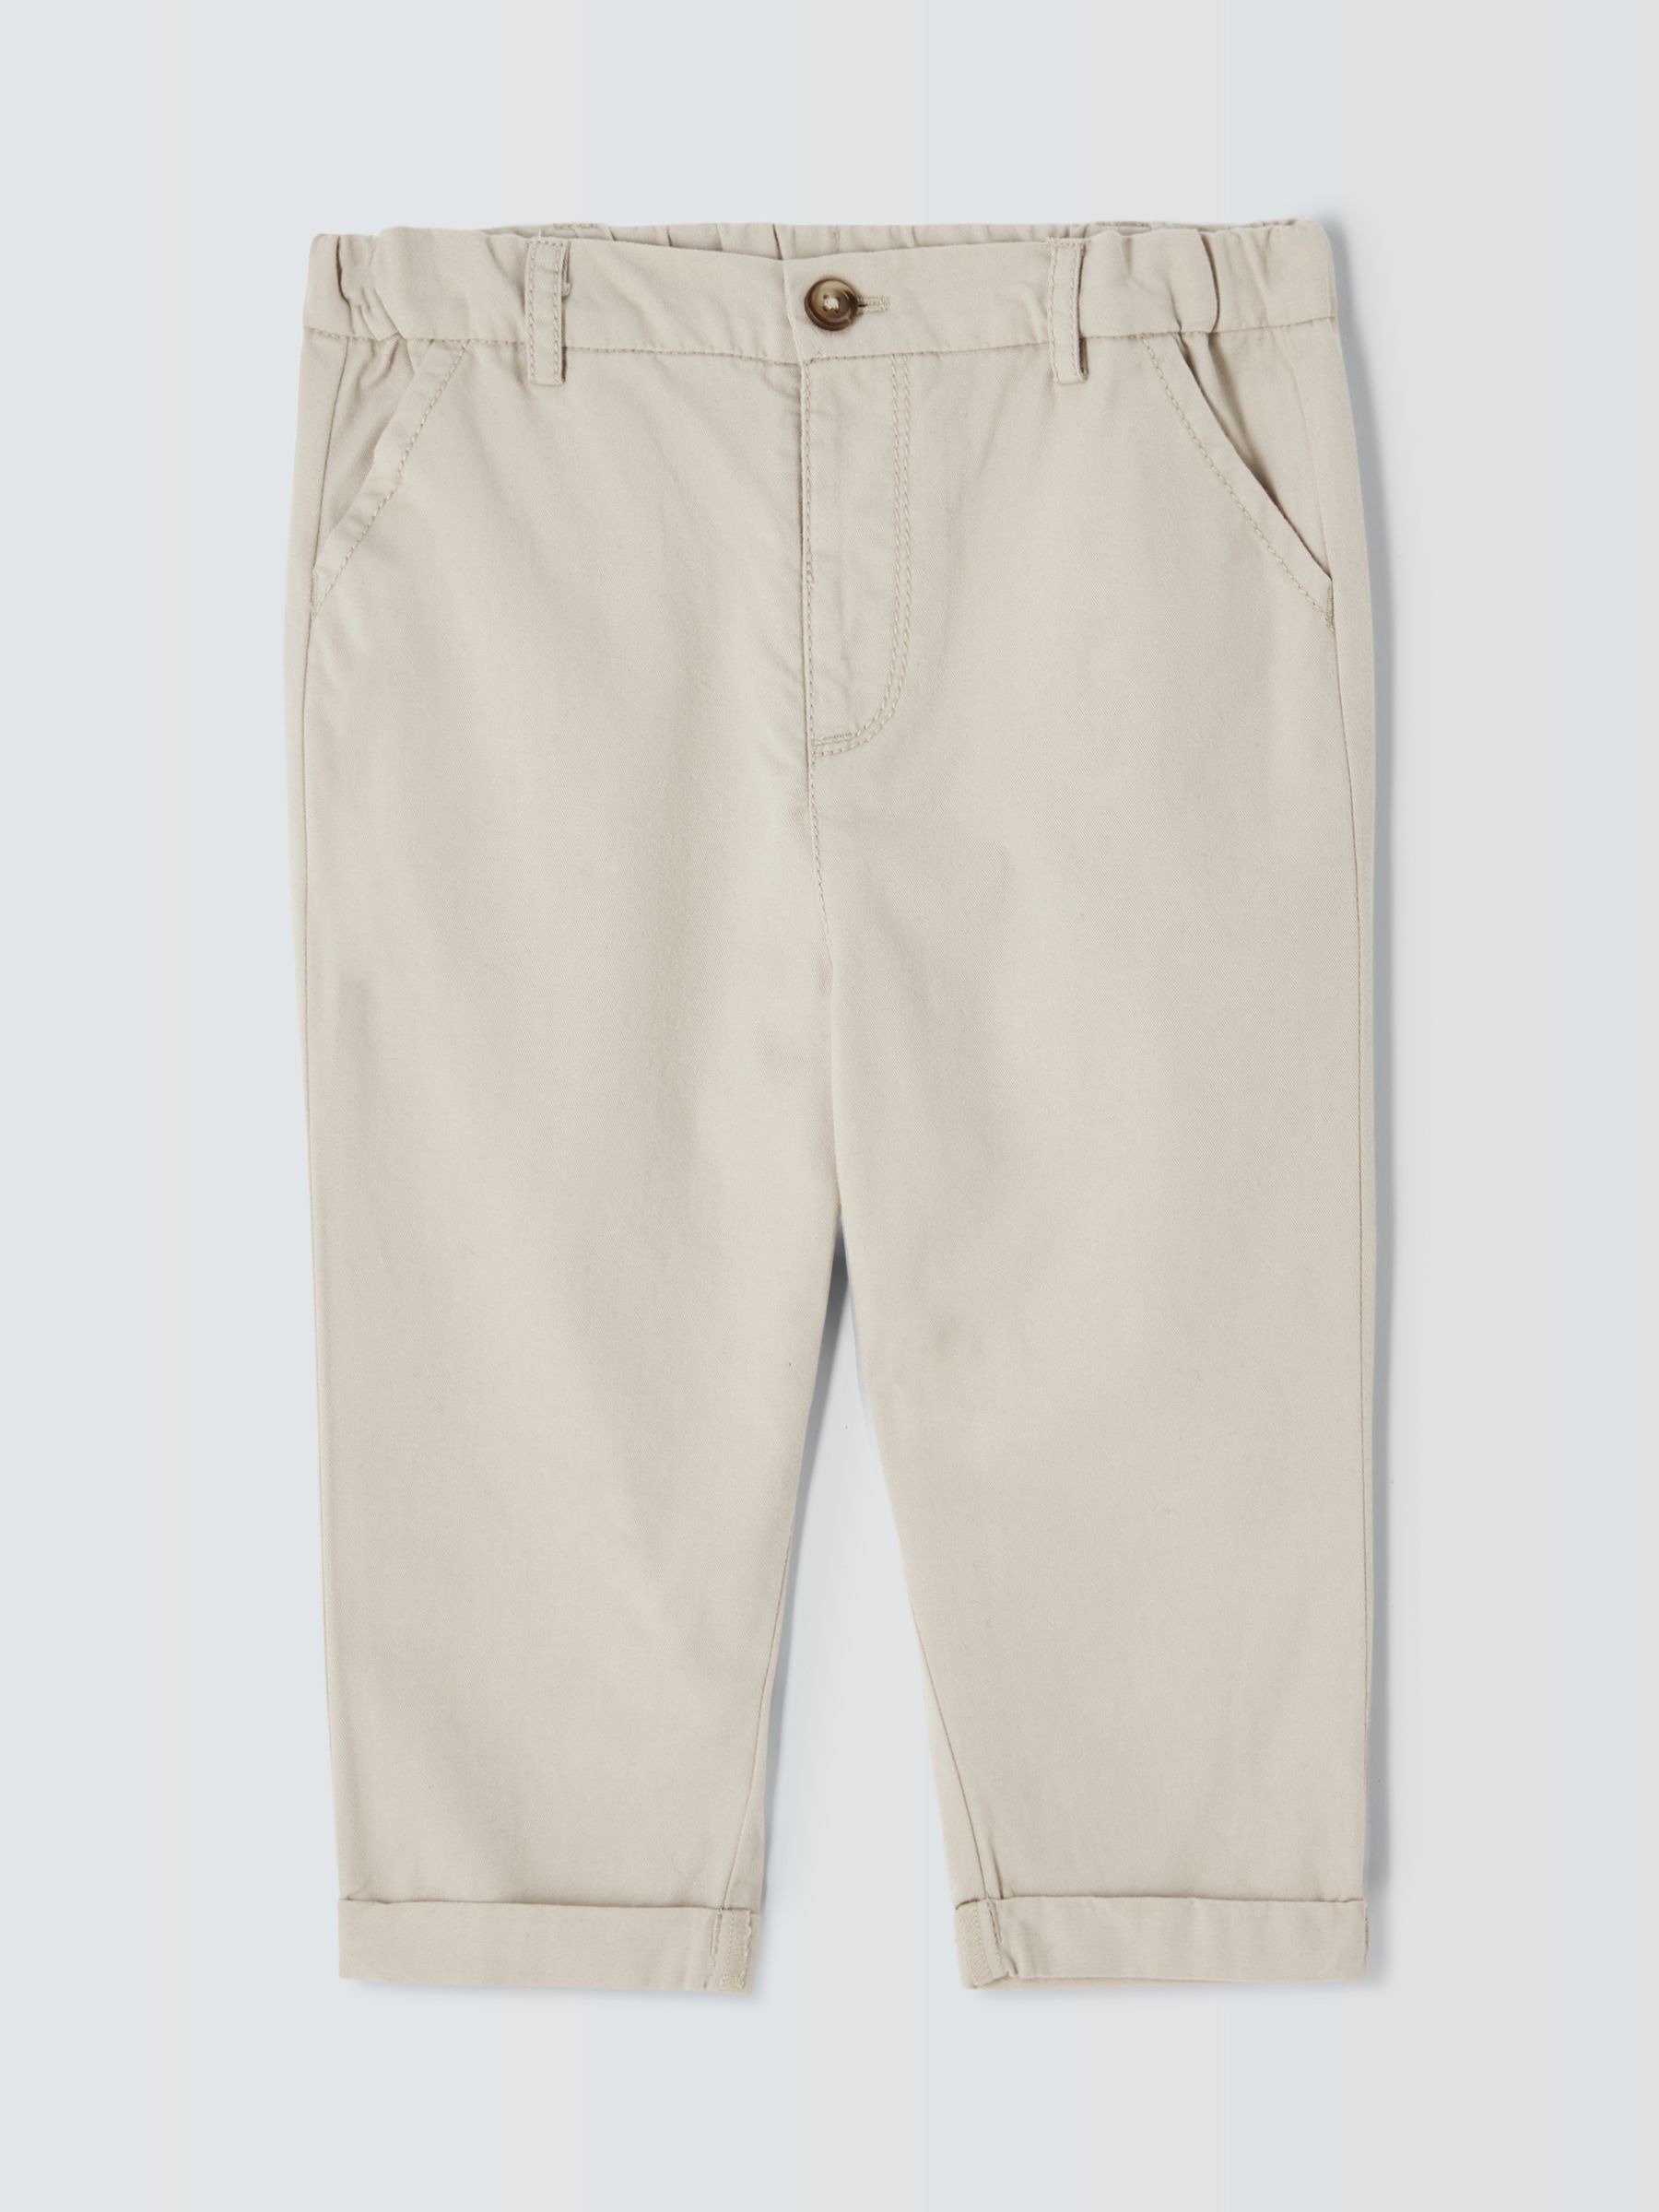 John Lewis Heirloom Collection Baby Straight Leg Chinos, Natrural, 0-3 months